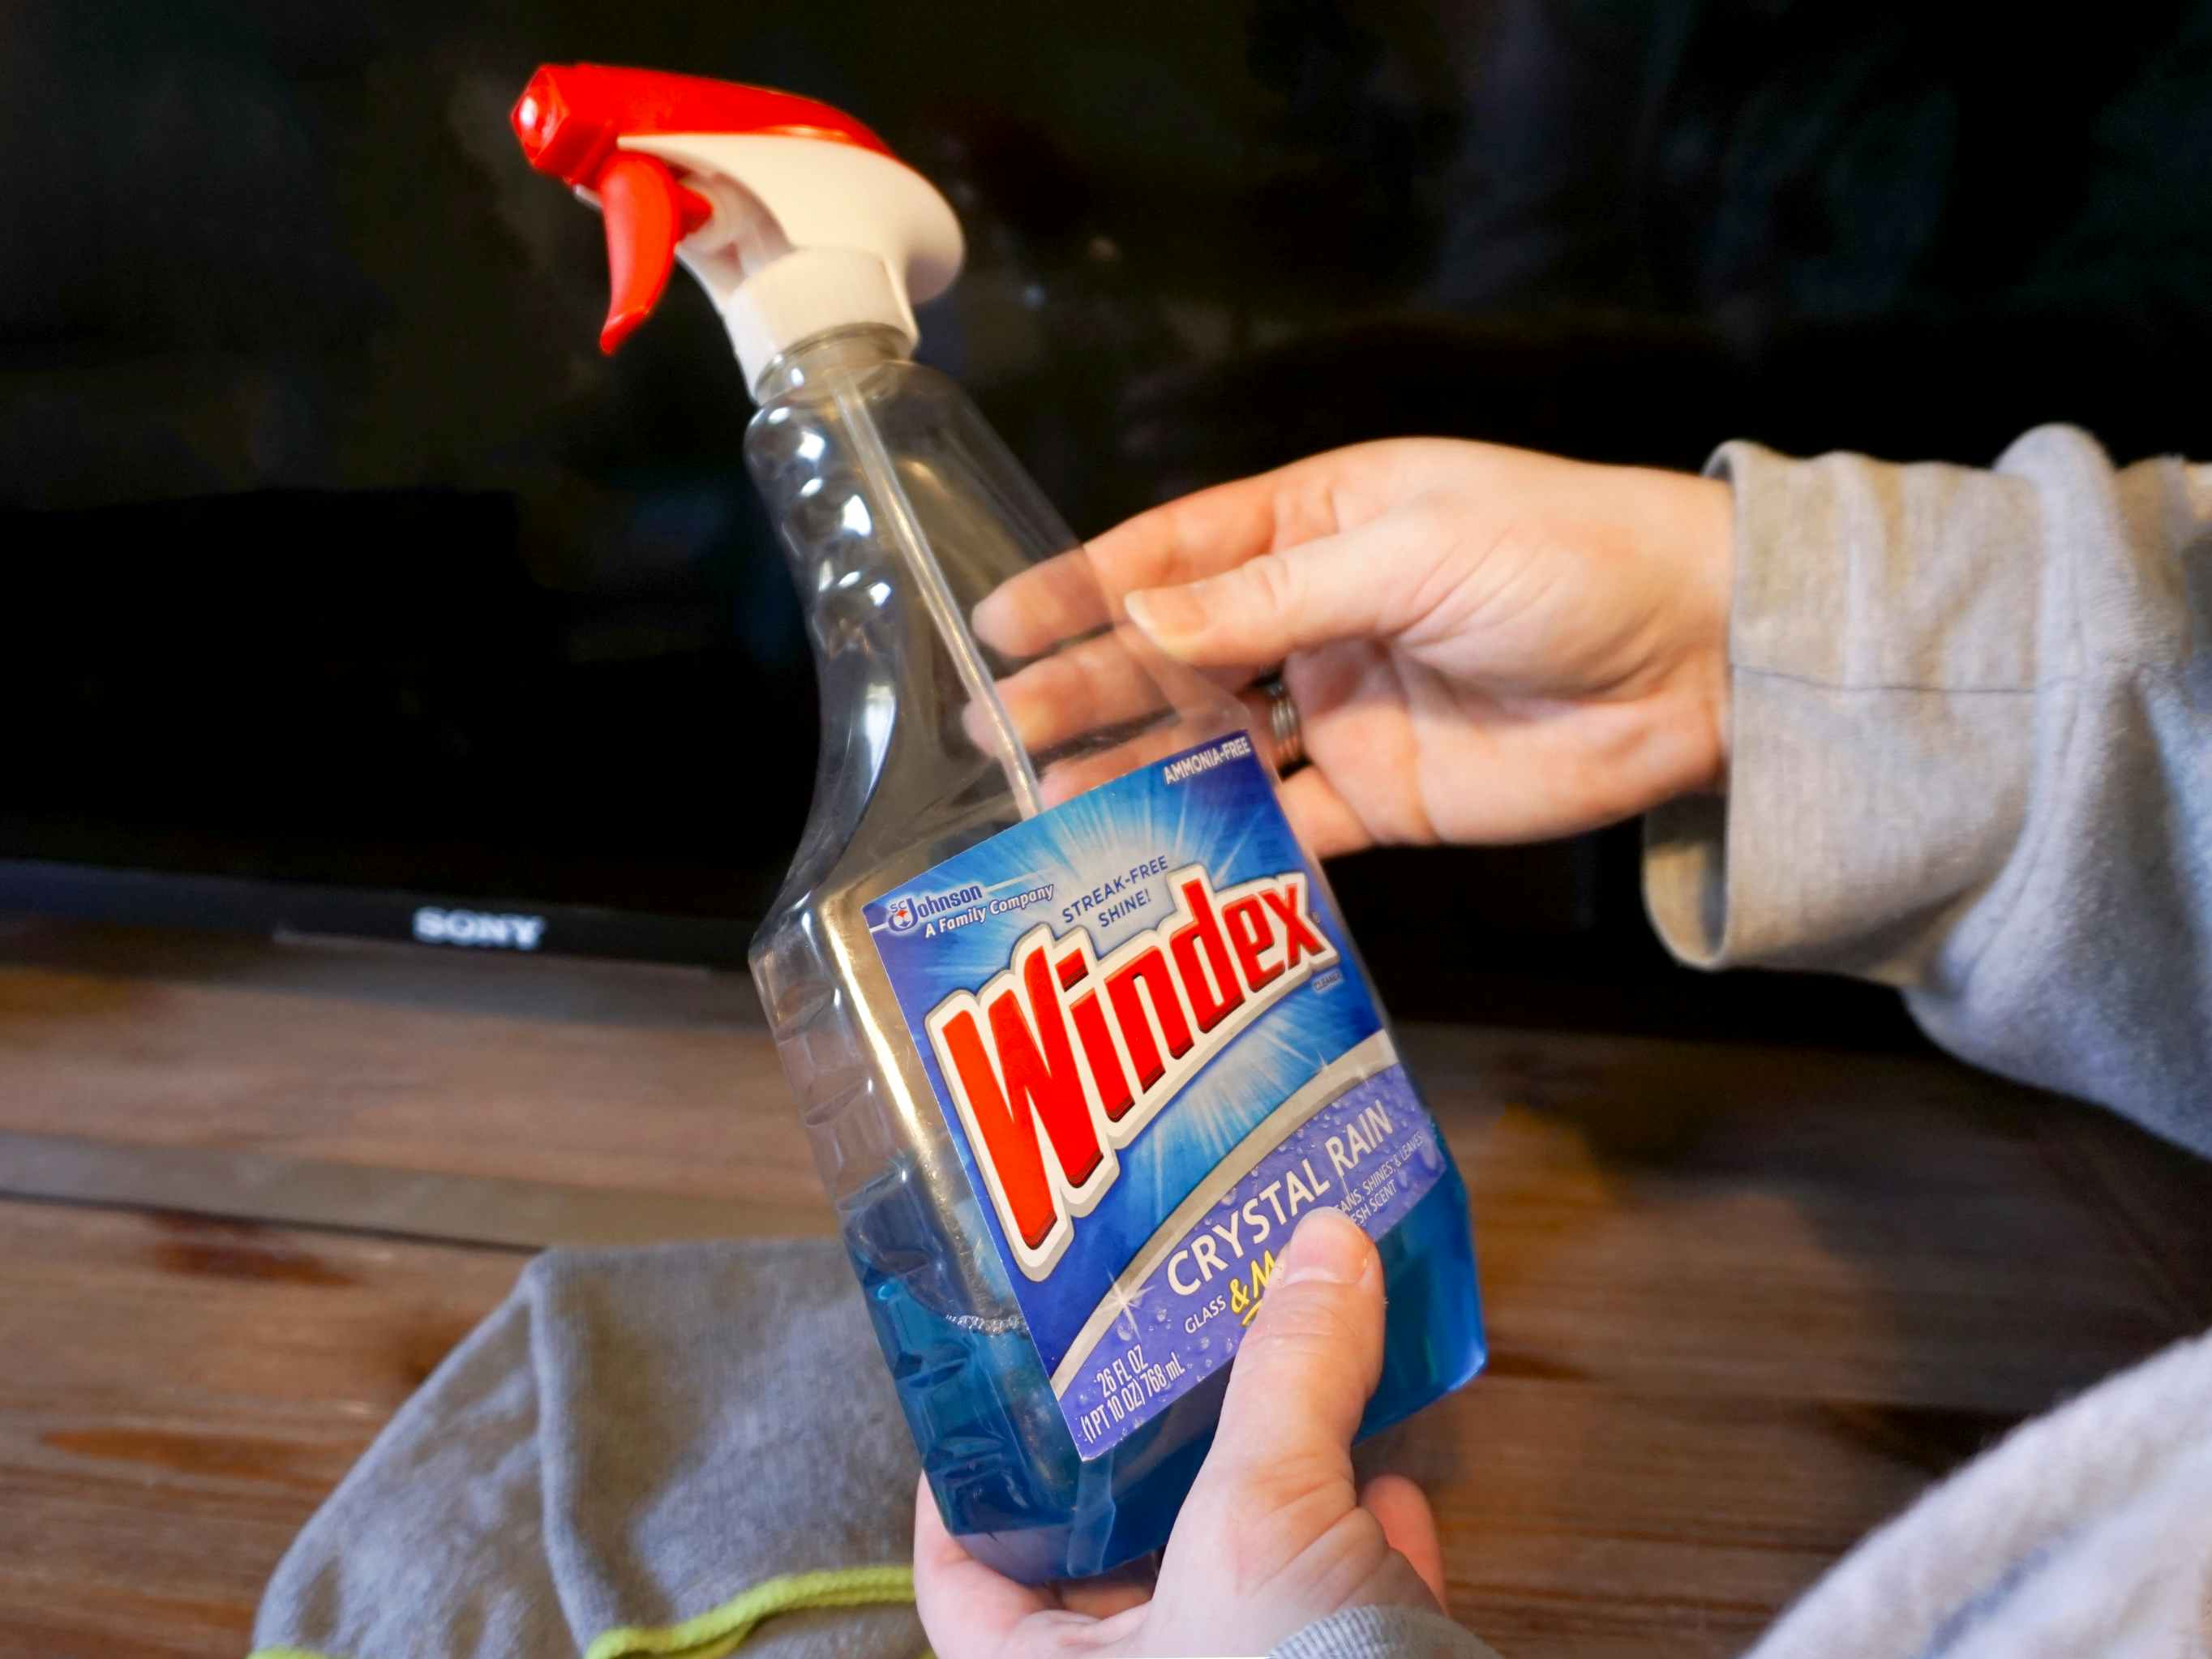 Someone holding a bottle of Windex in front of their TV